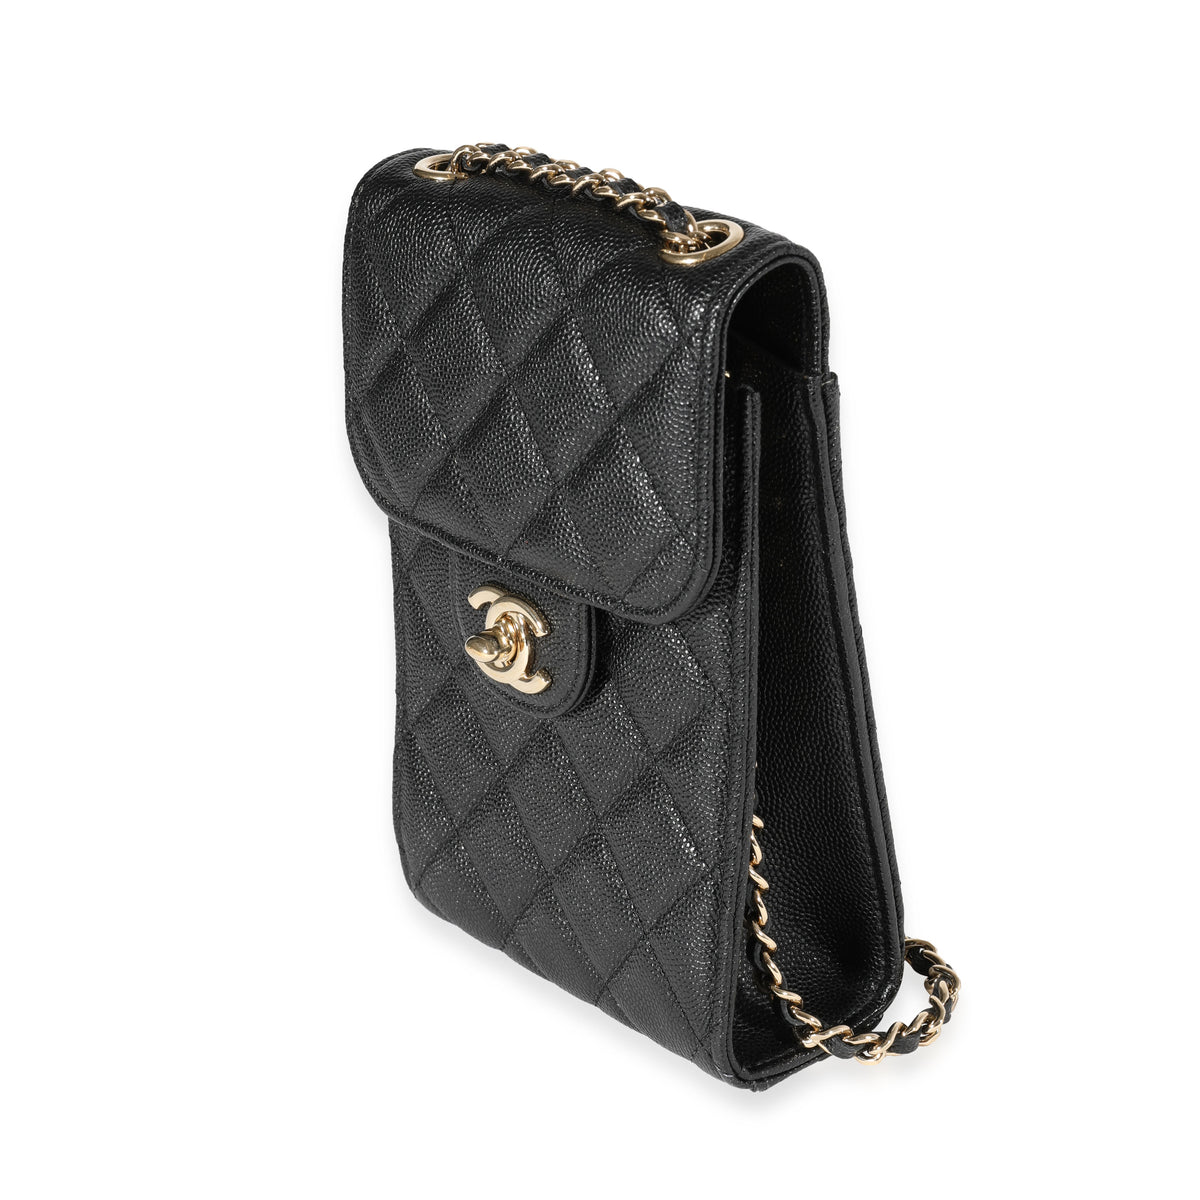 Chanel Black Quilted Leather Phone Holder Crossbody Bag Chanel